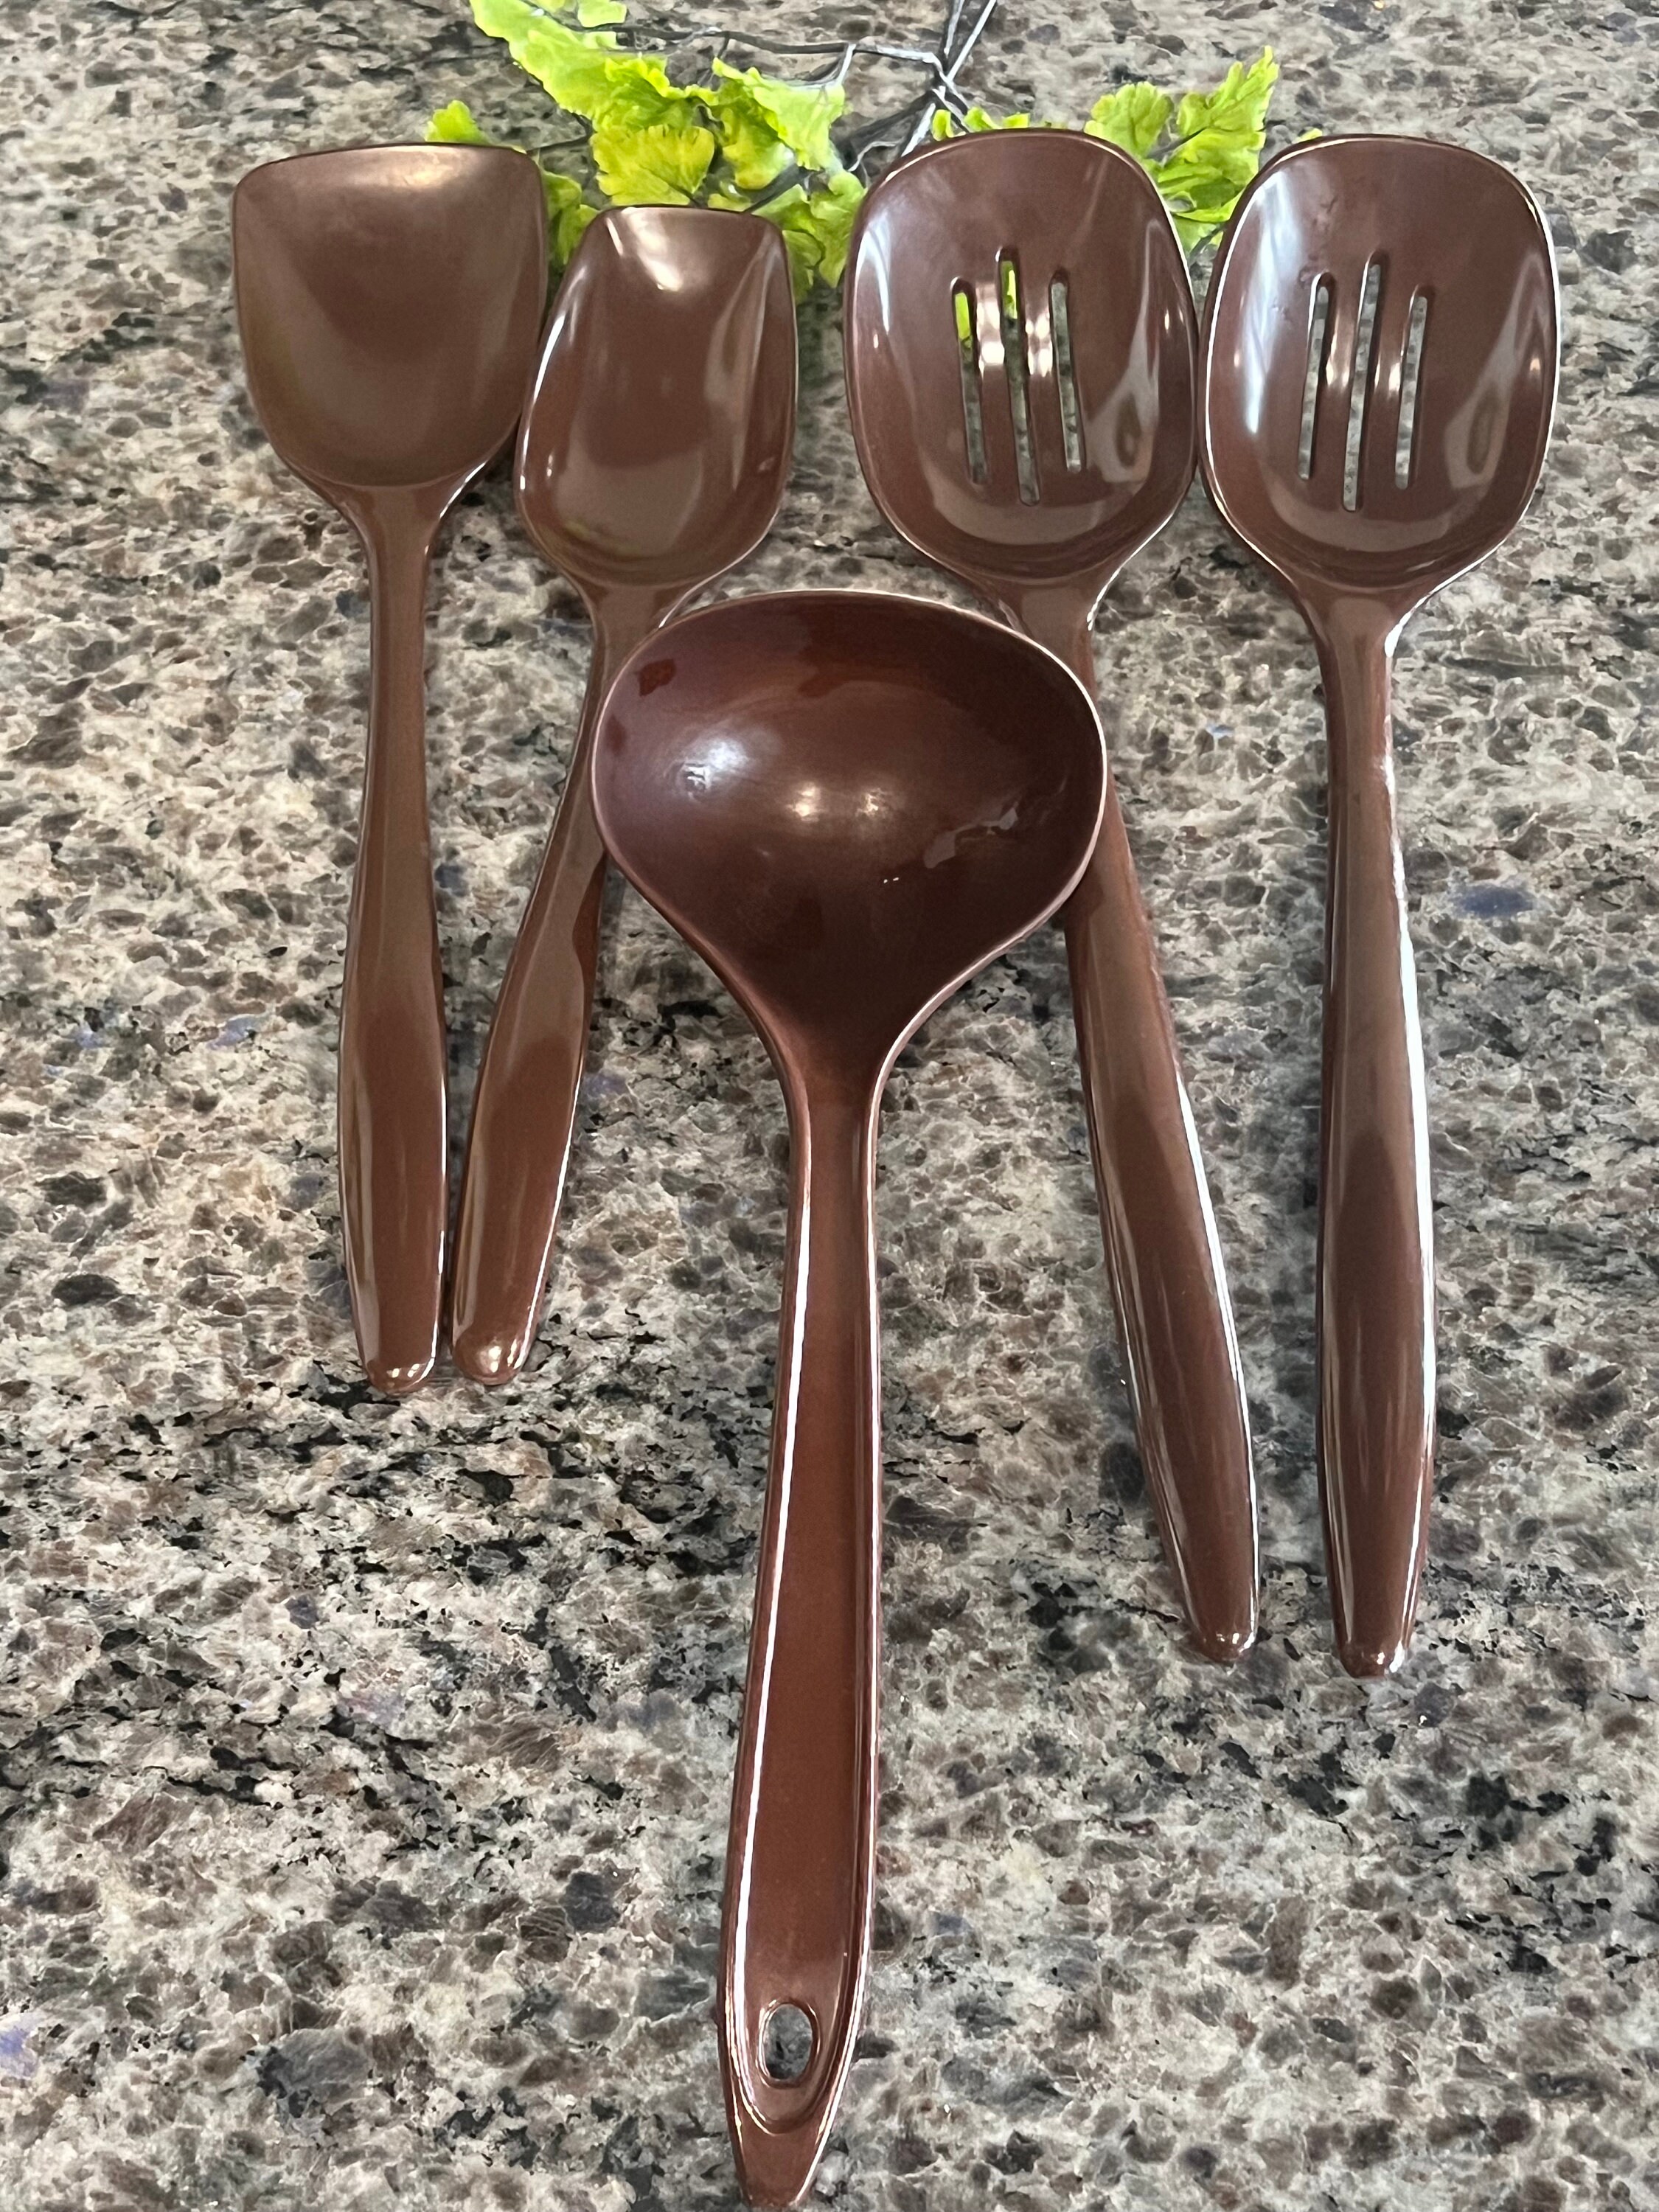 Flipper 6-piece Reversible Measuring Cup and Spoon Set by Trudeau 